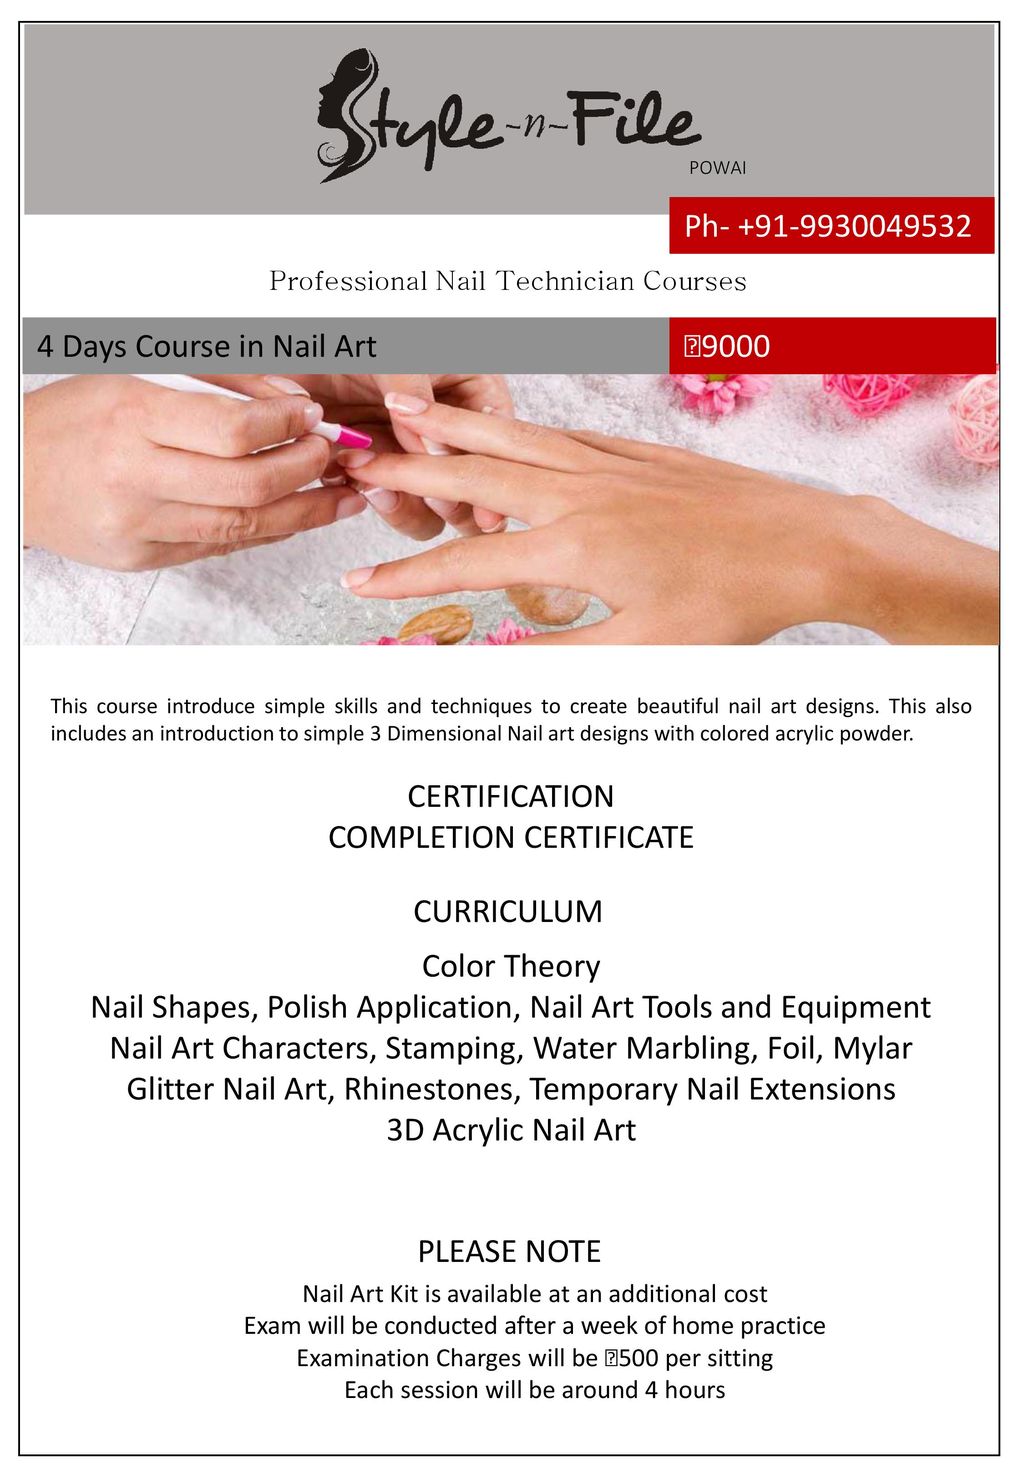 Nail Academy – Style Your Nails Pune